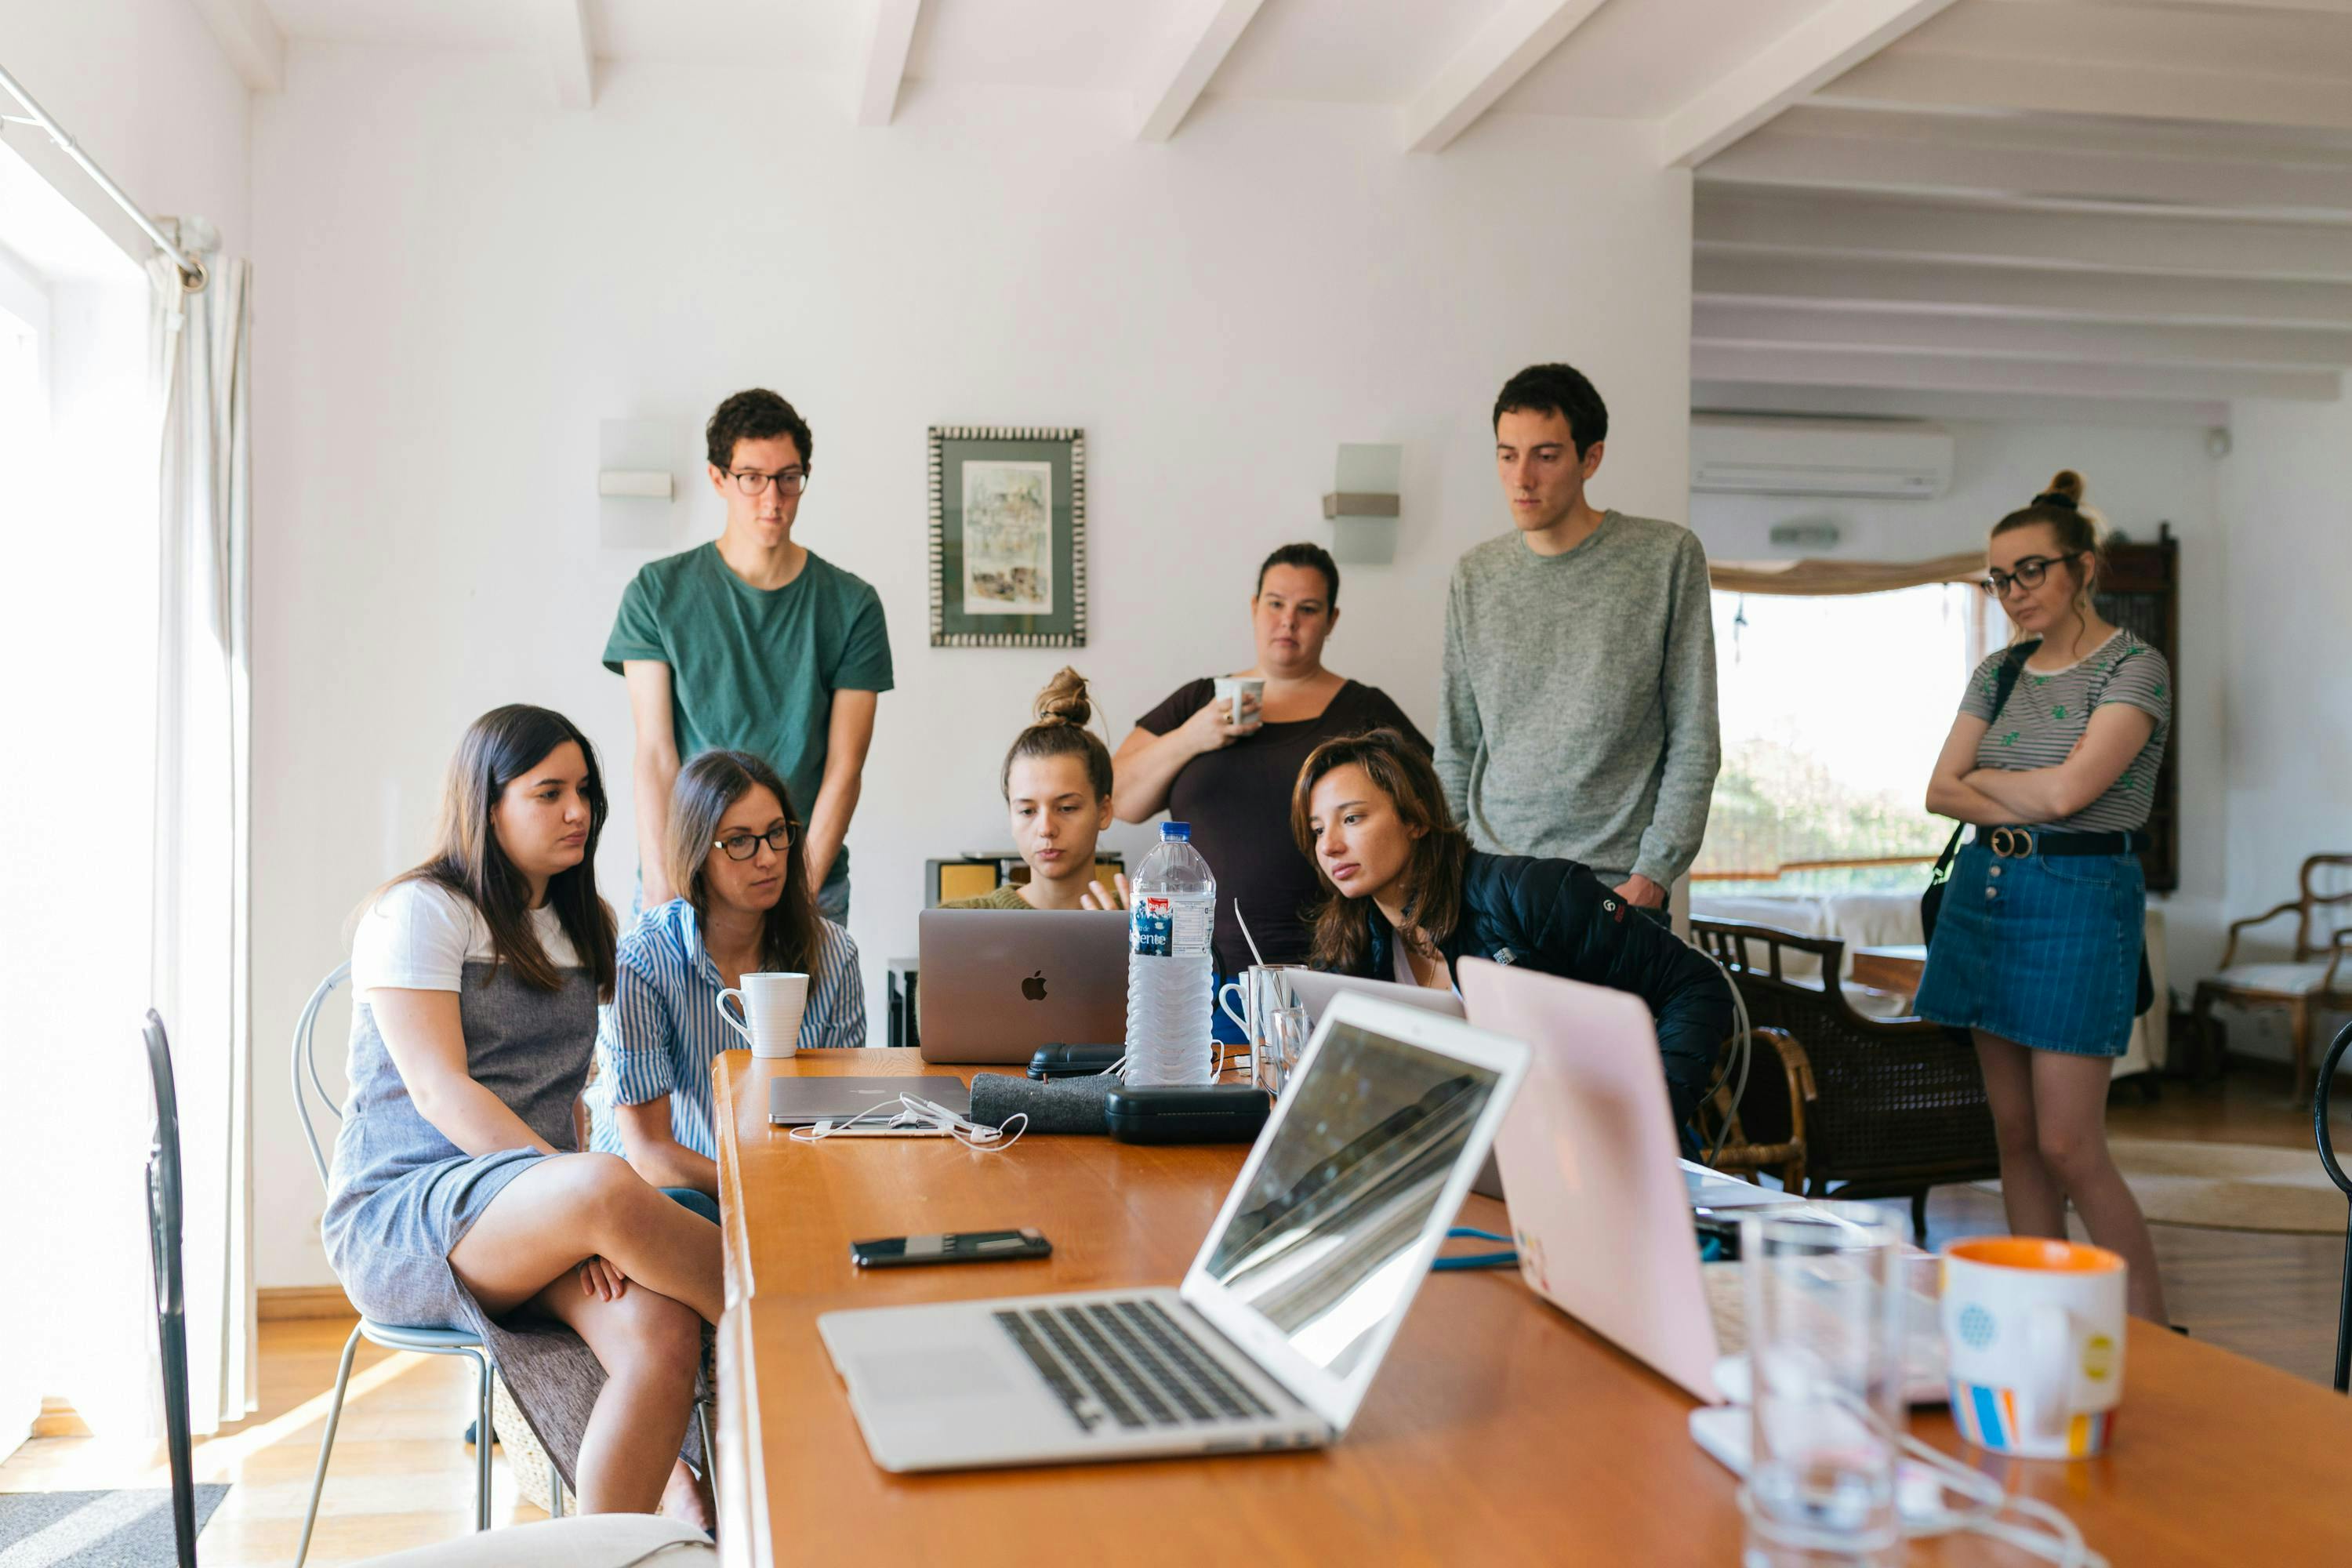 A diverse group of individuals gathered around a table, focusing on a laptop screen during a collaborative meeting. This image is ideal for depicting User Experience (UX) Researcher Jobs, highlighting teamwork and collective brainstorming.